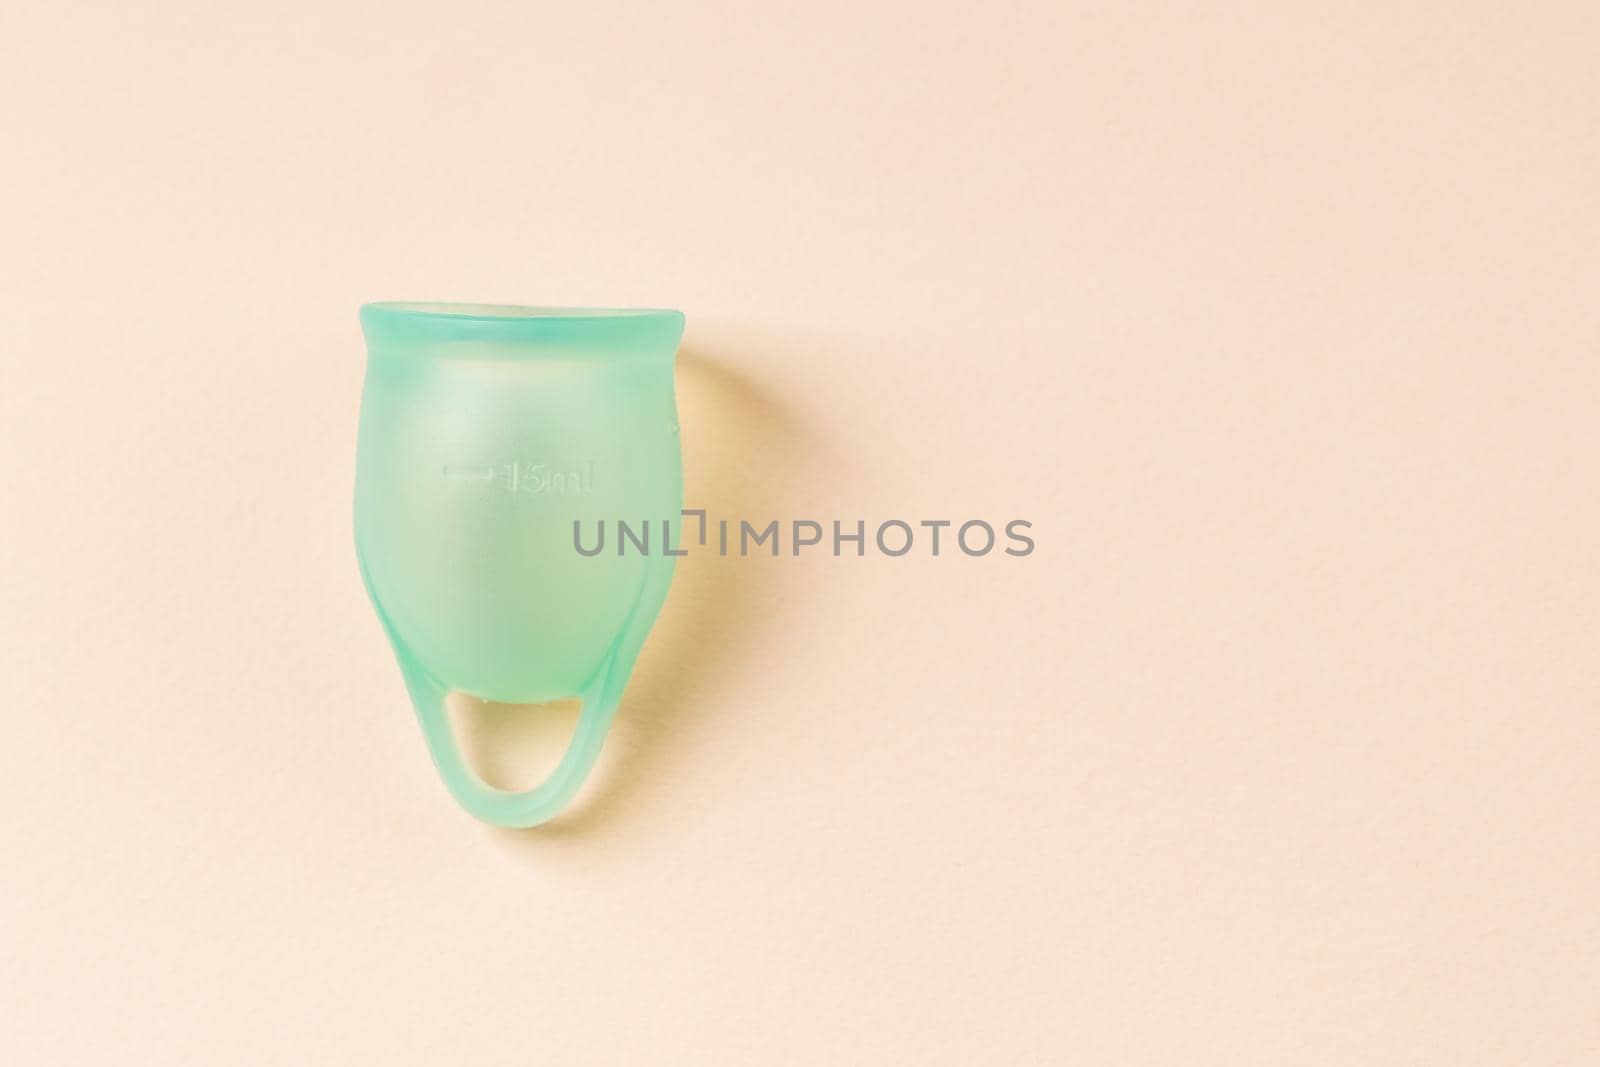 Blue silicone menstrual cup on beige pastel background by Syvanych